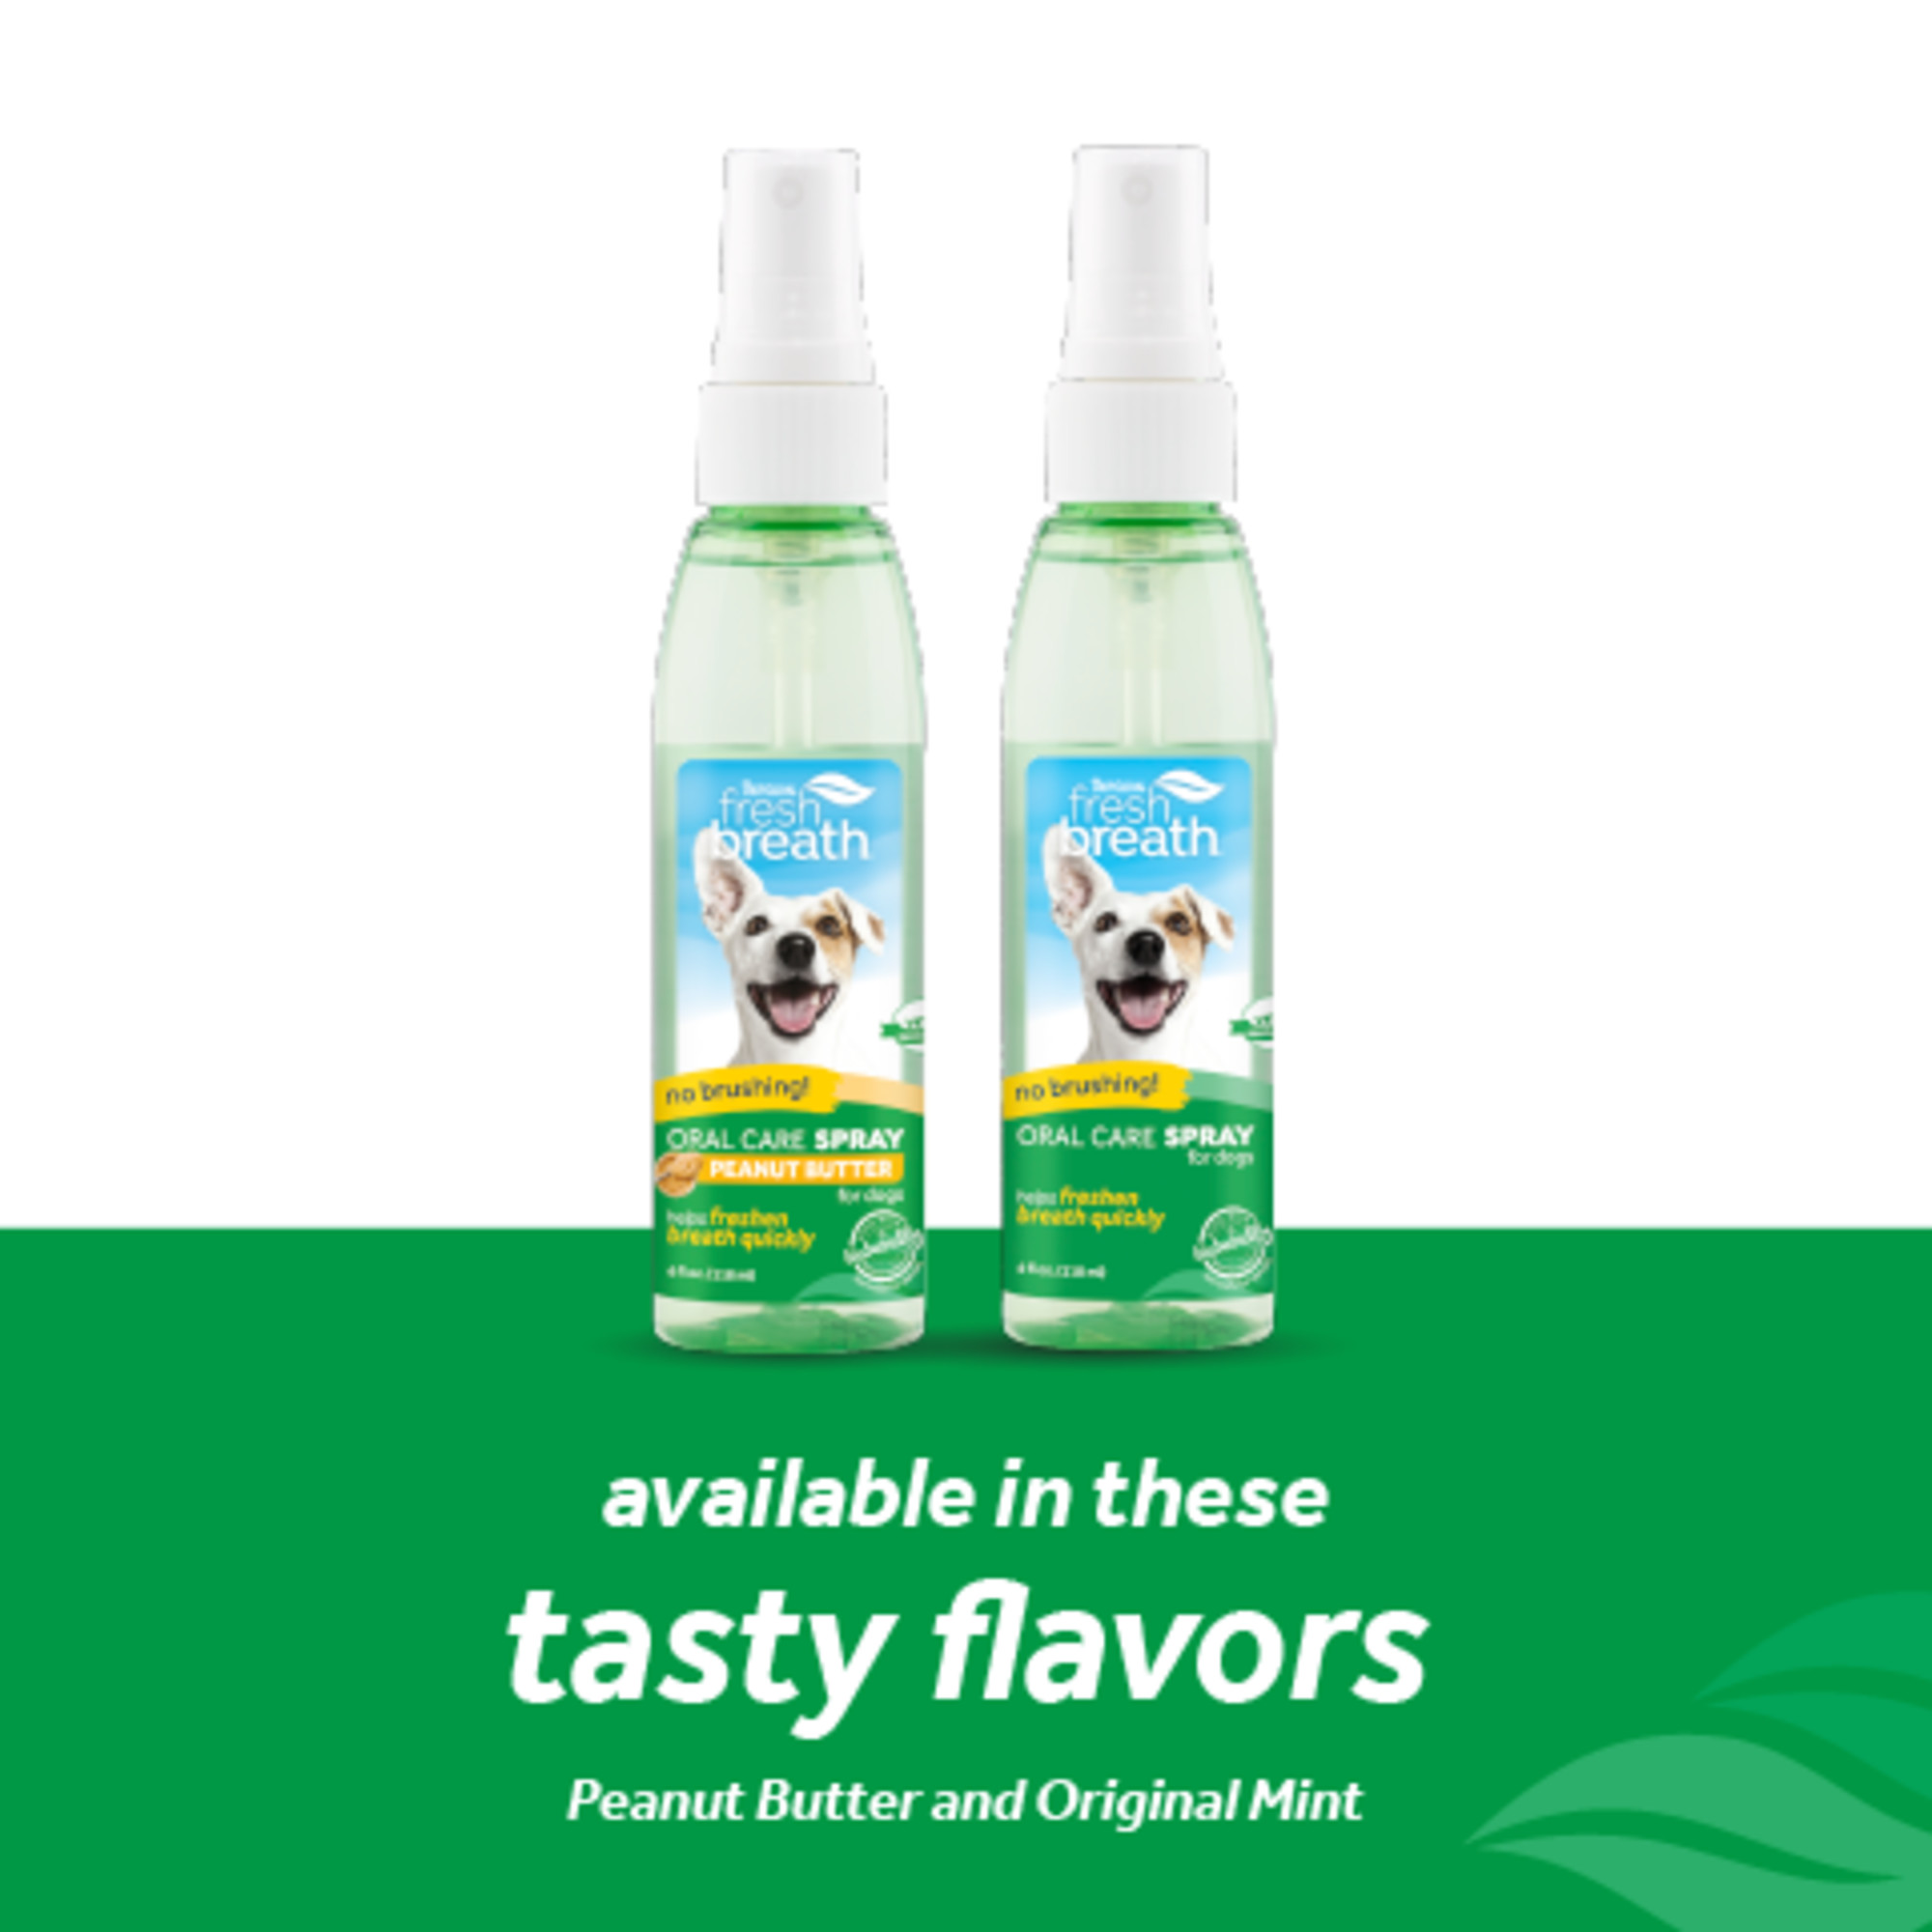 Oral Care Spray for Dogs